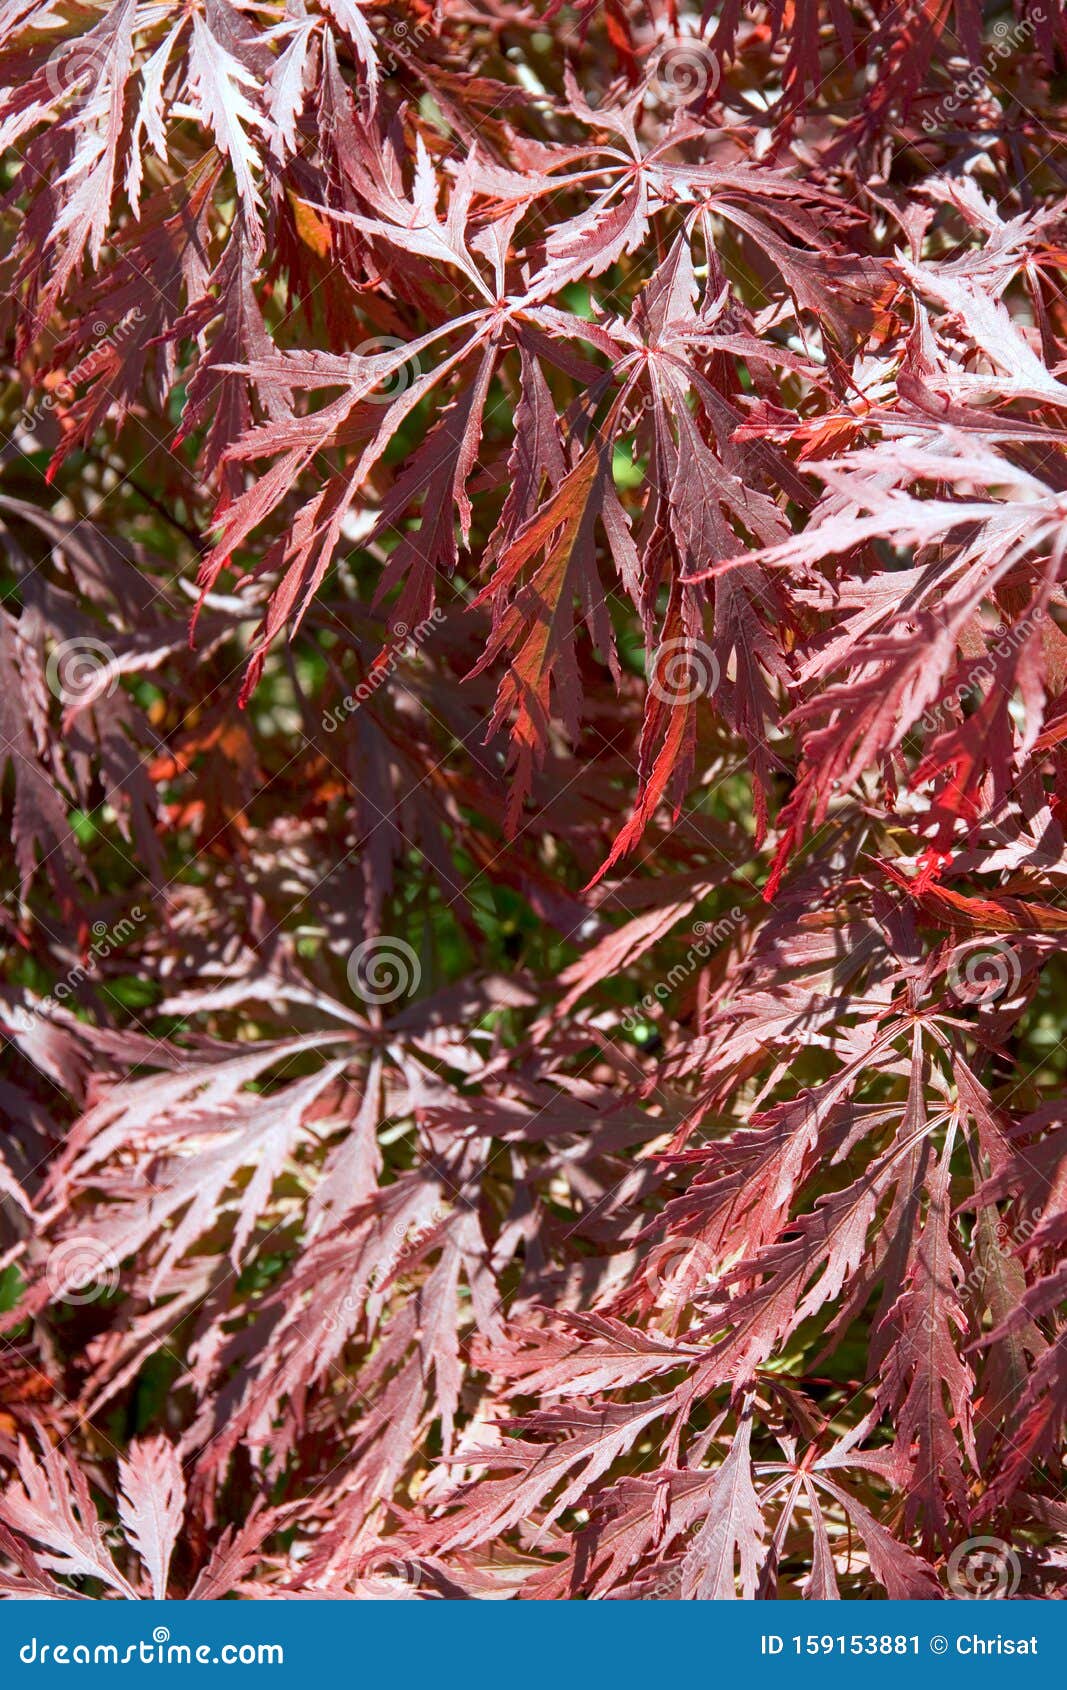 Acer leaves stock image. Image of backdrop, great, abstract - 159153881